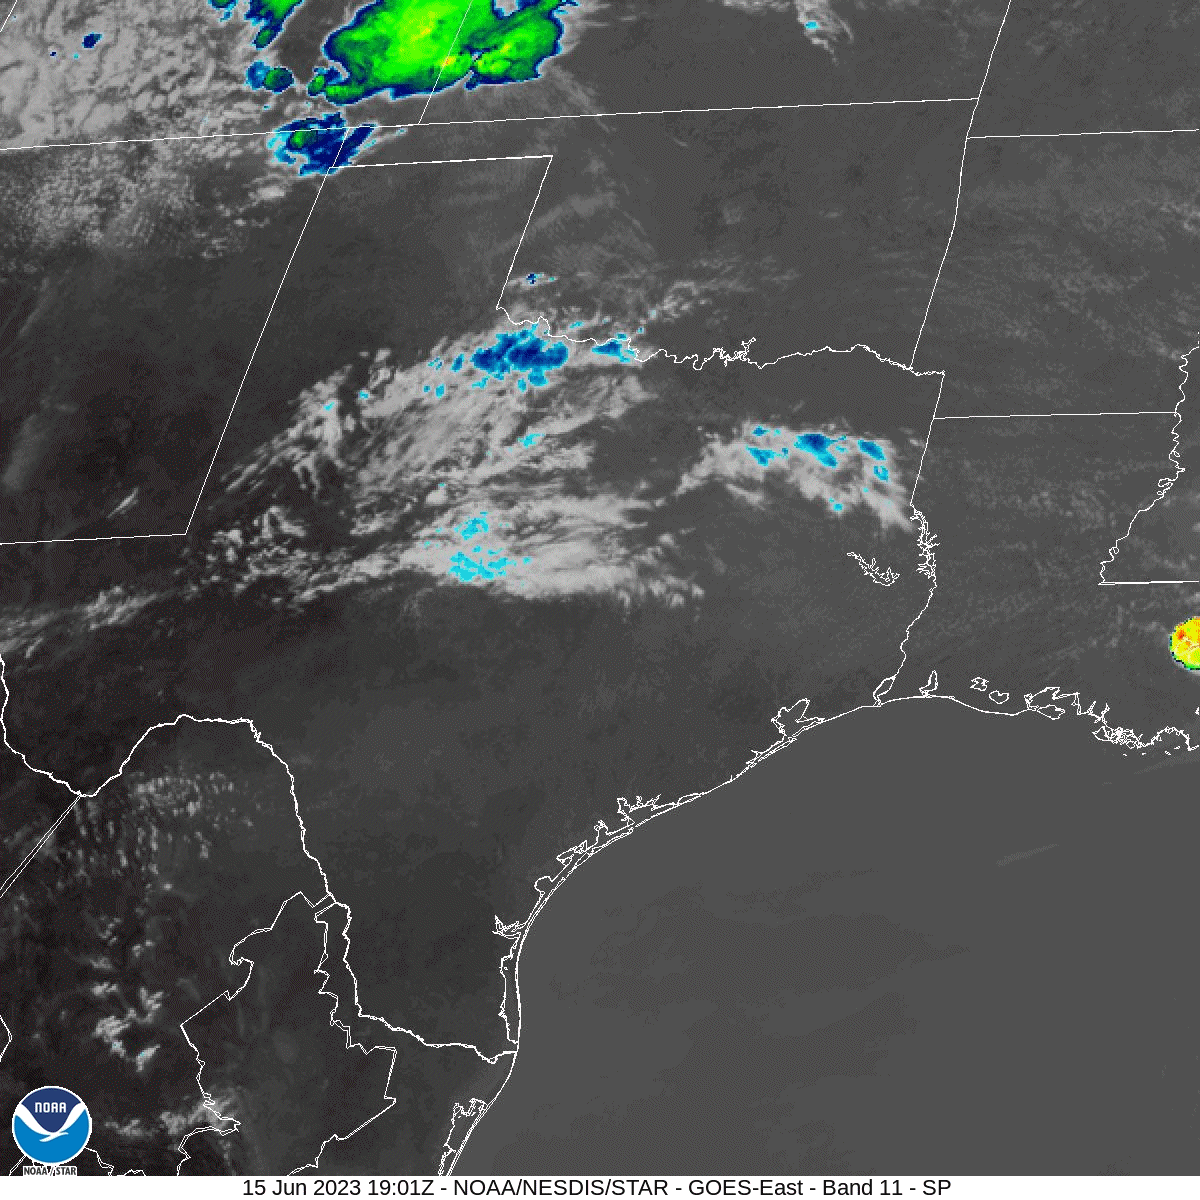 Regional Band 11 Cloud Top Infrared Satellite Loop from 3:01 pm CDT June 15, 2023 to 1:01 am CDT on June 16, 2023